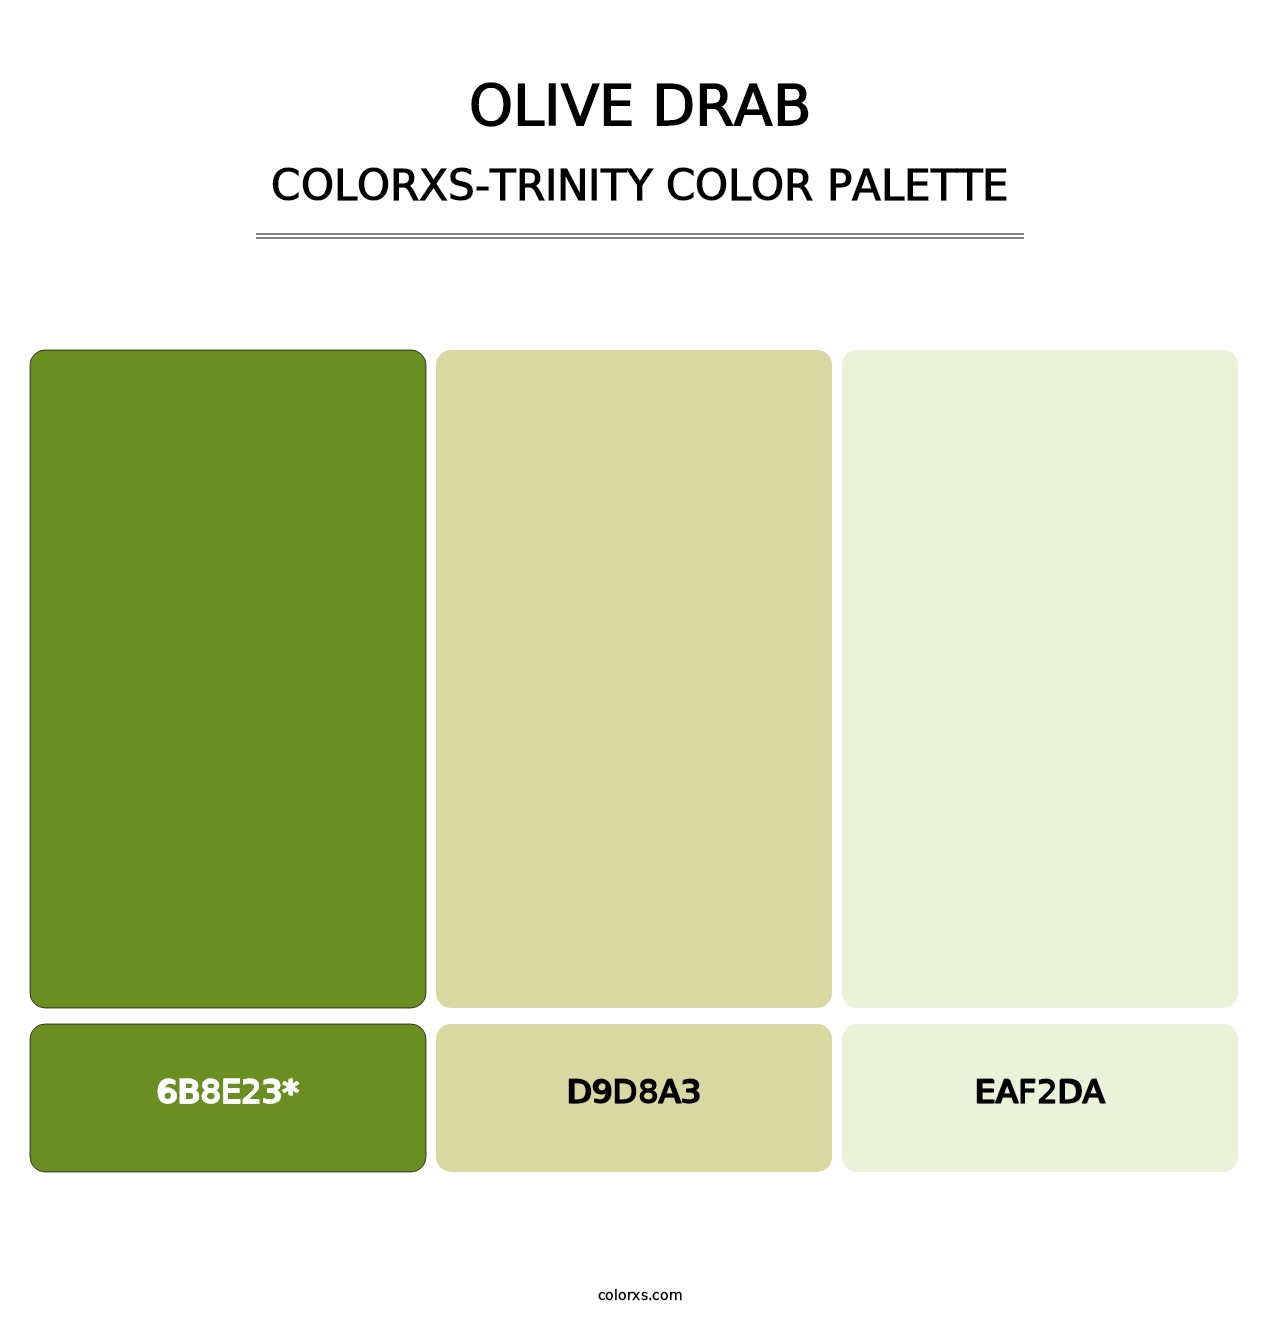 Olive Drab - Colorxs Trinity Palette